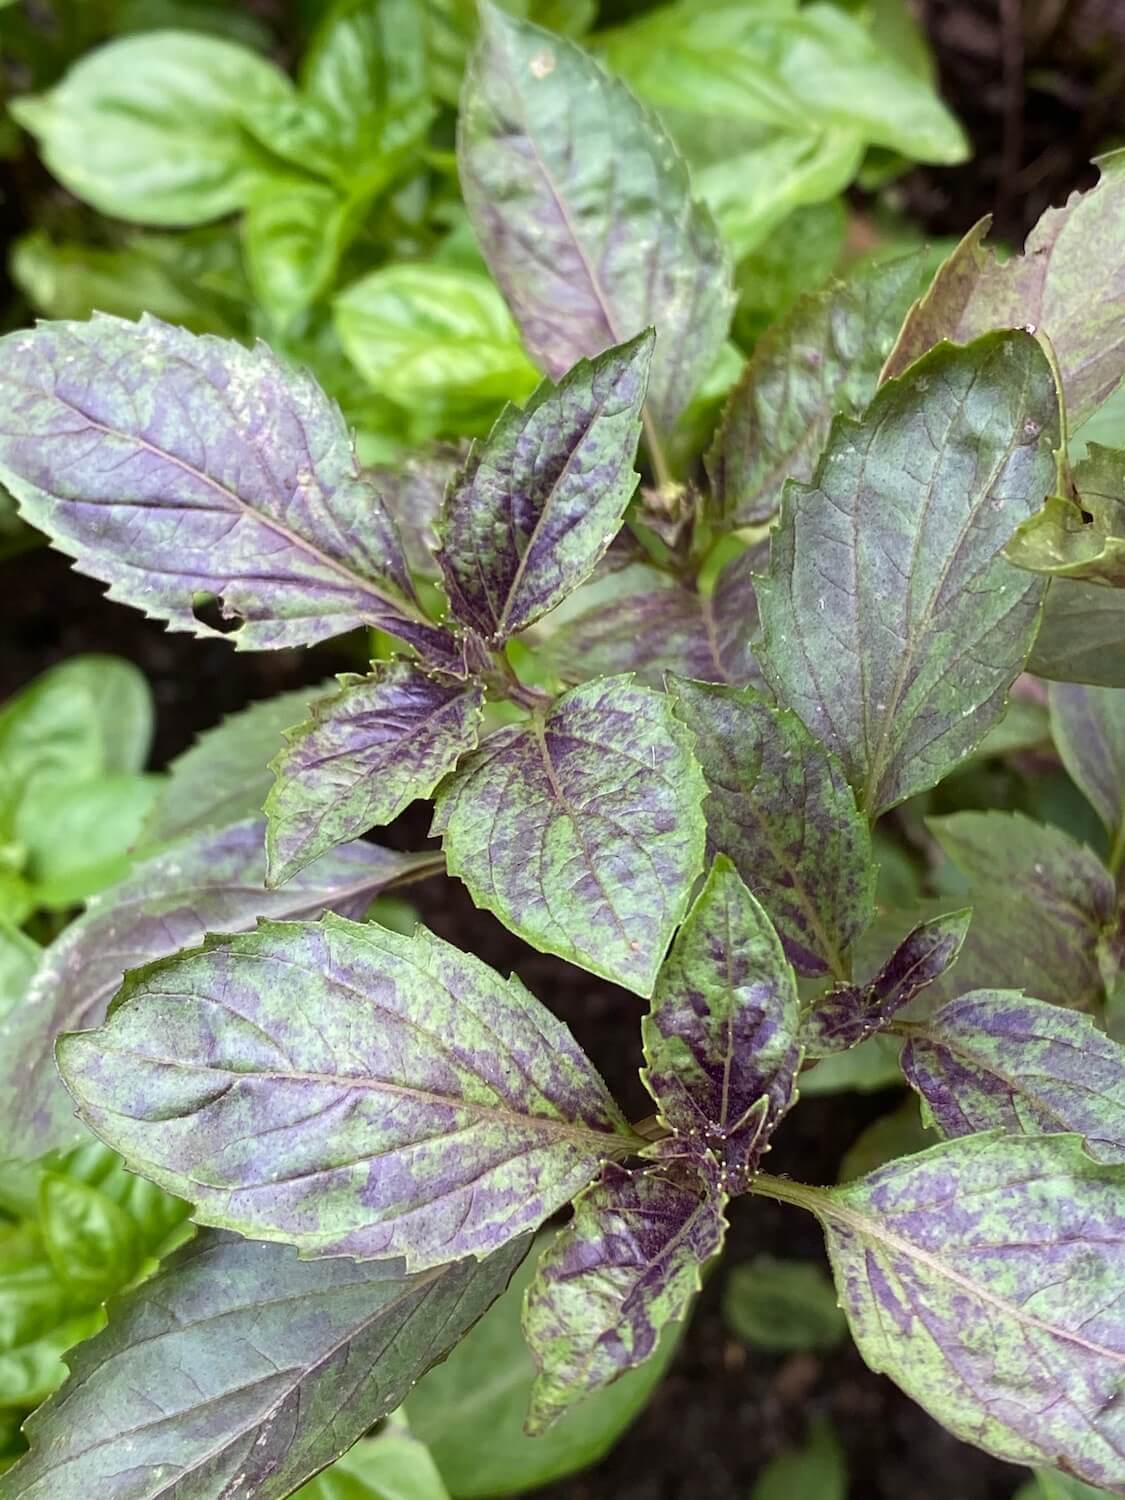 Variagated basil leaves pop up with a blend of purple and green leaves and waxy dark green leaves of a different variety of basil out of focus in the background.  This photo was taken in a Seattle P-Patch garden.